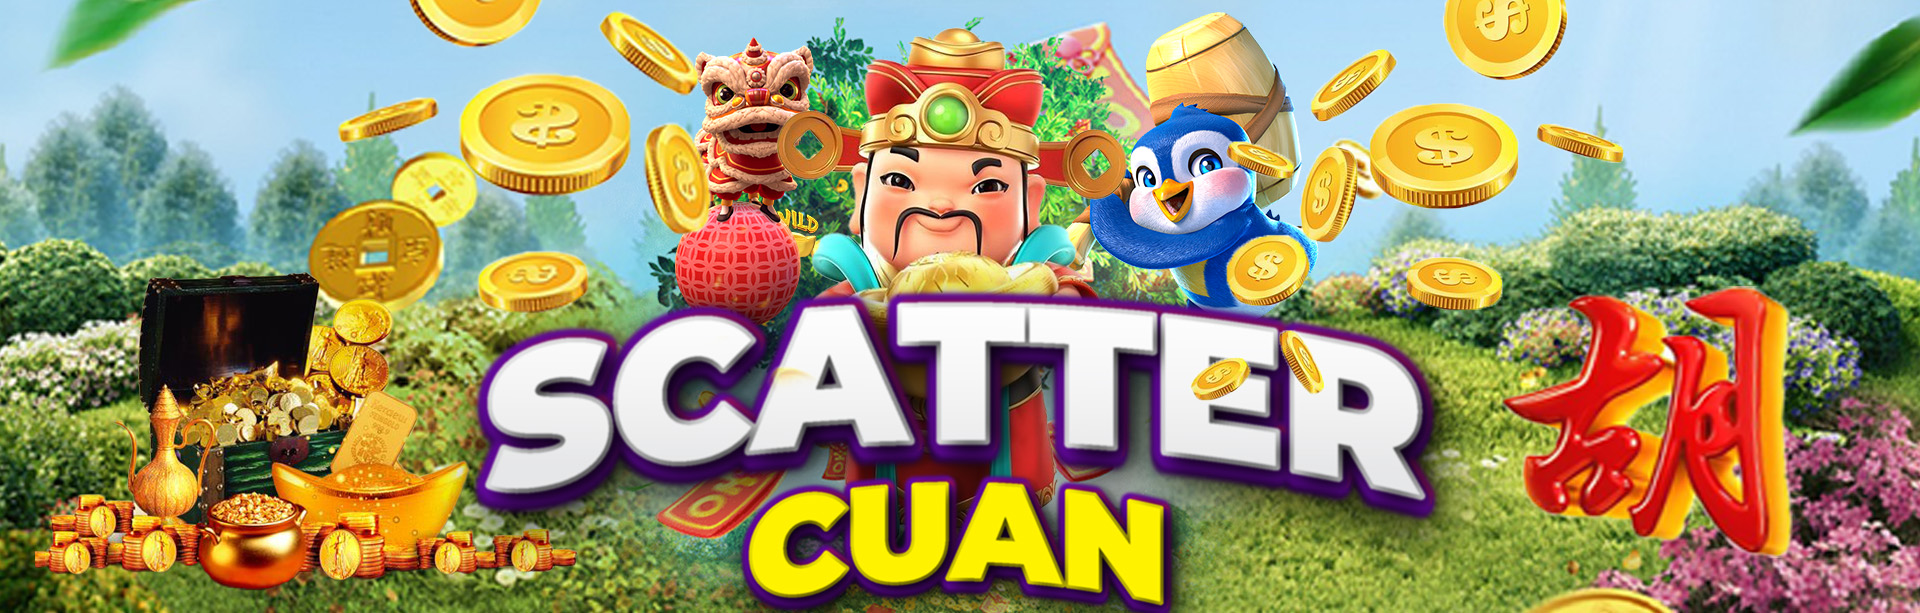 PROMO SCATTER CUAN	